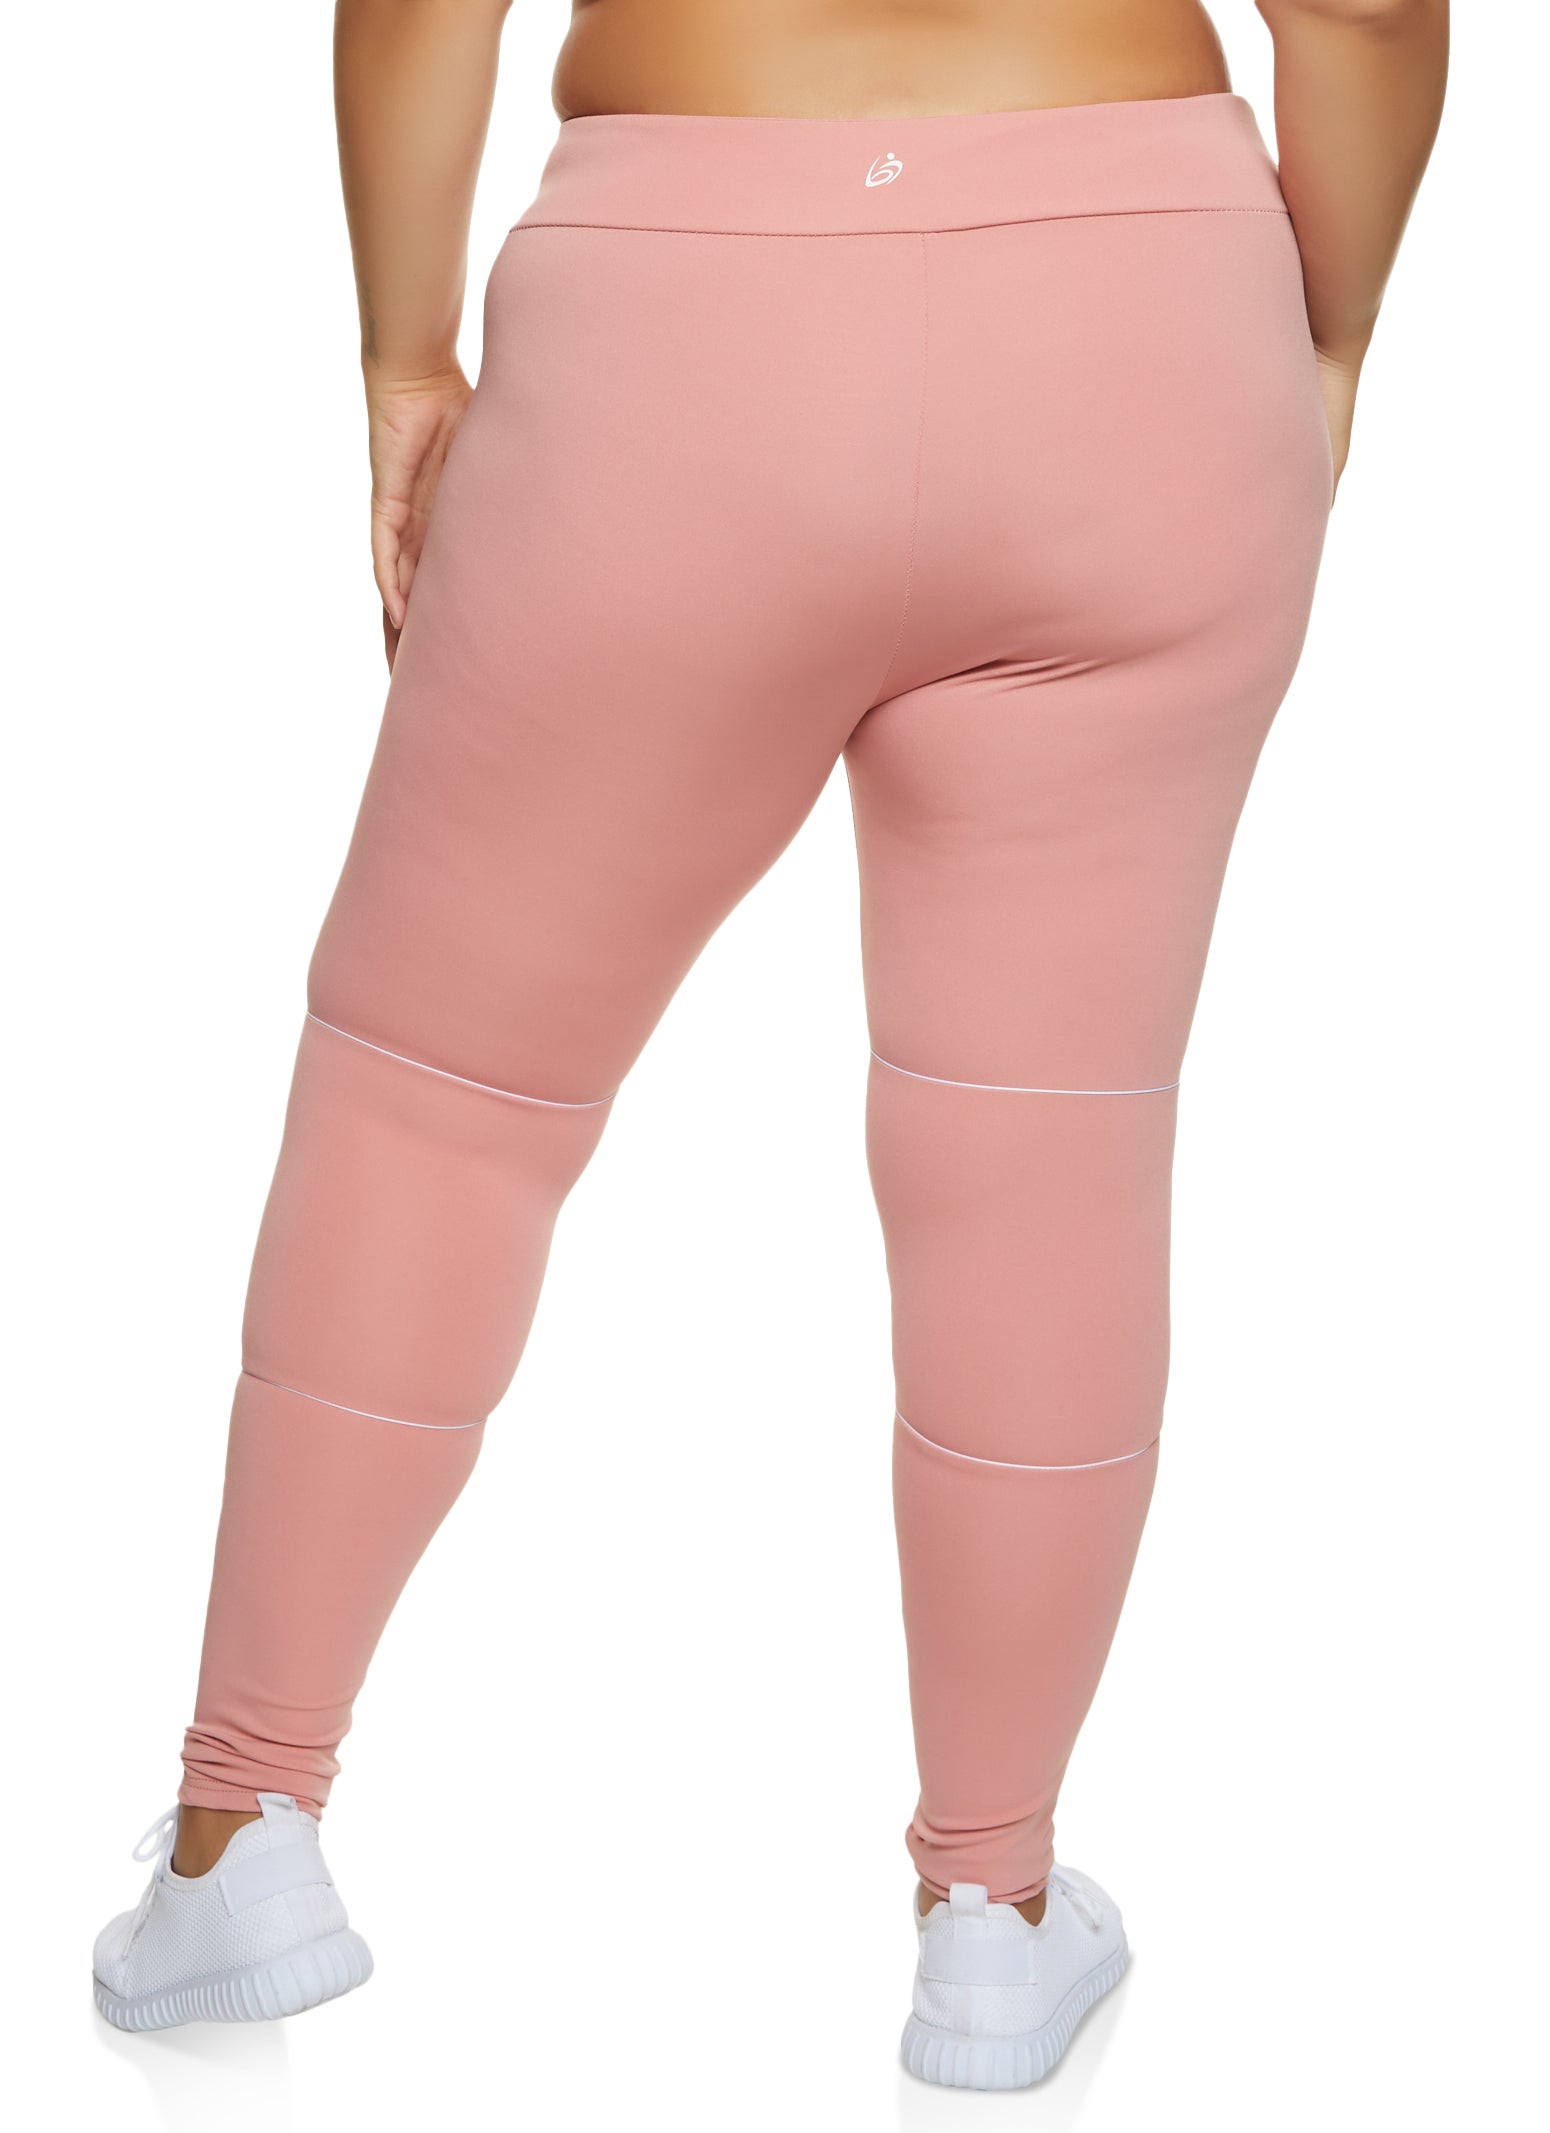 Rainbow Shops Womens Plus Size Contrast Piping Leggings, Pink, Size 3X